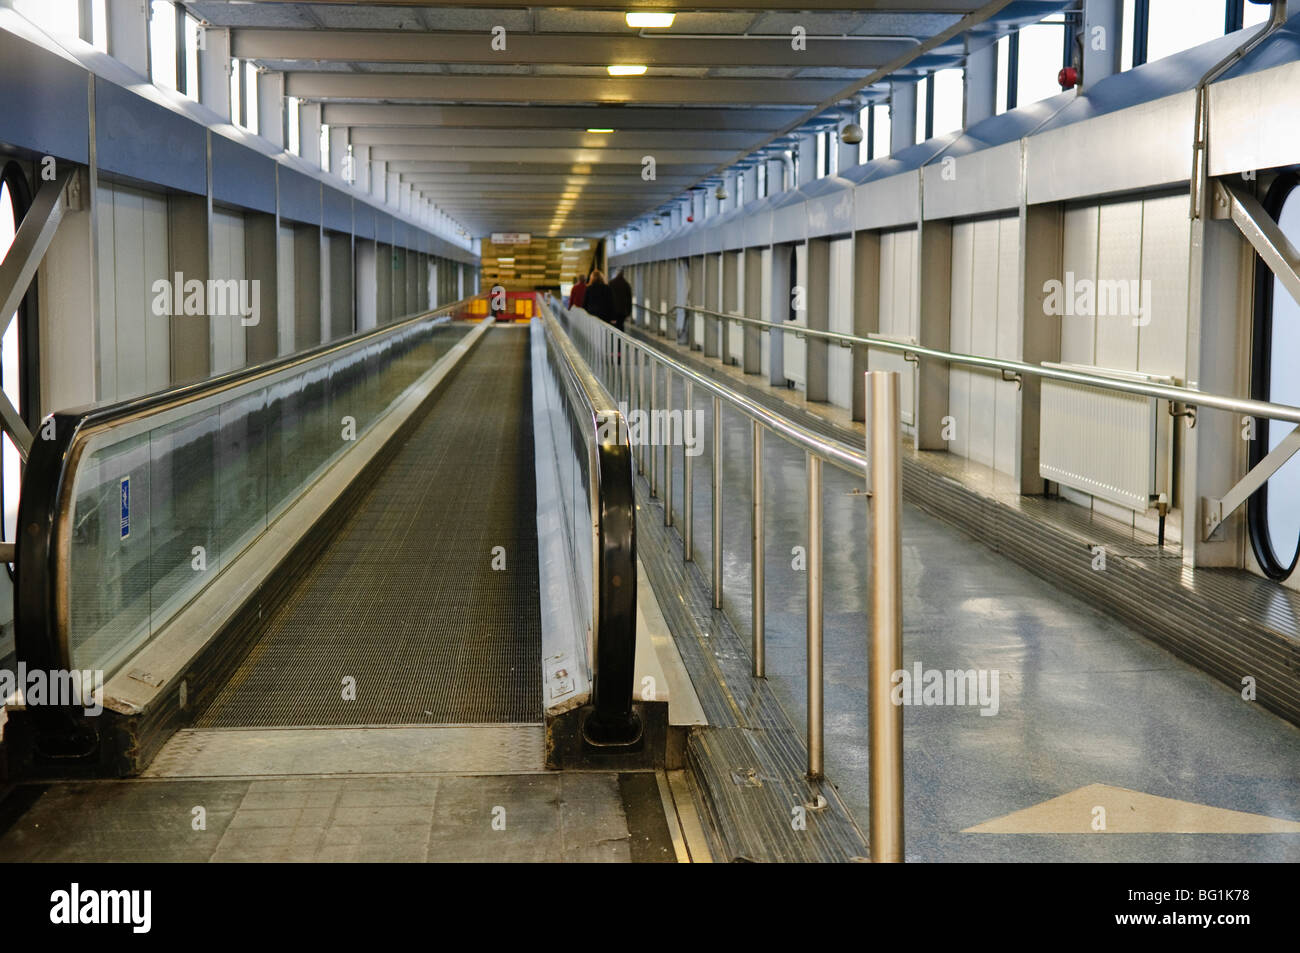 The old moving walkway at Belfast International Airport, decommissioned